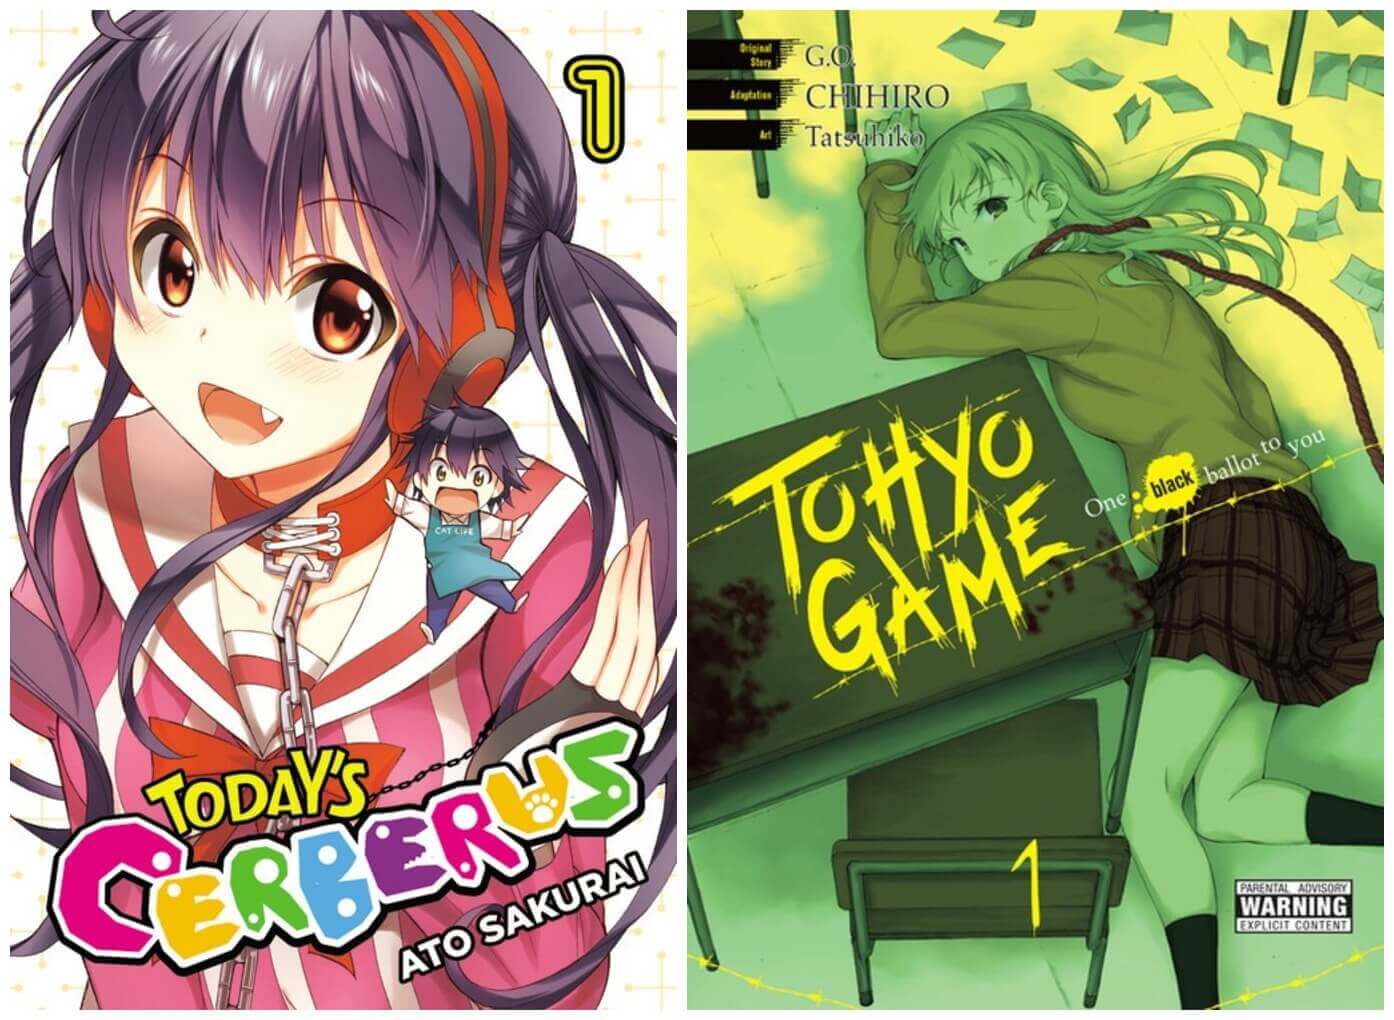 October 2016 Manga Releases Covers for Today's Cerberus and Tohyo Game.